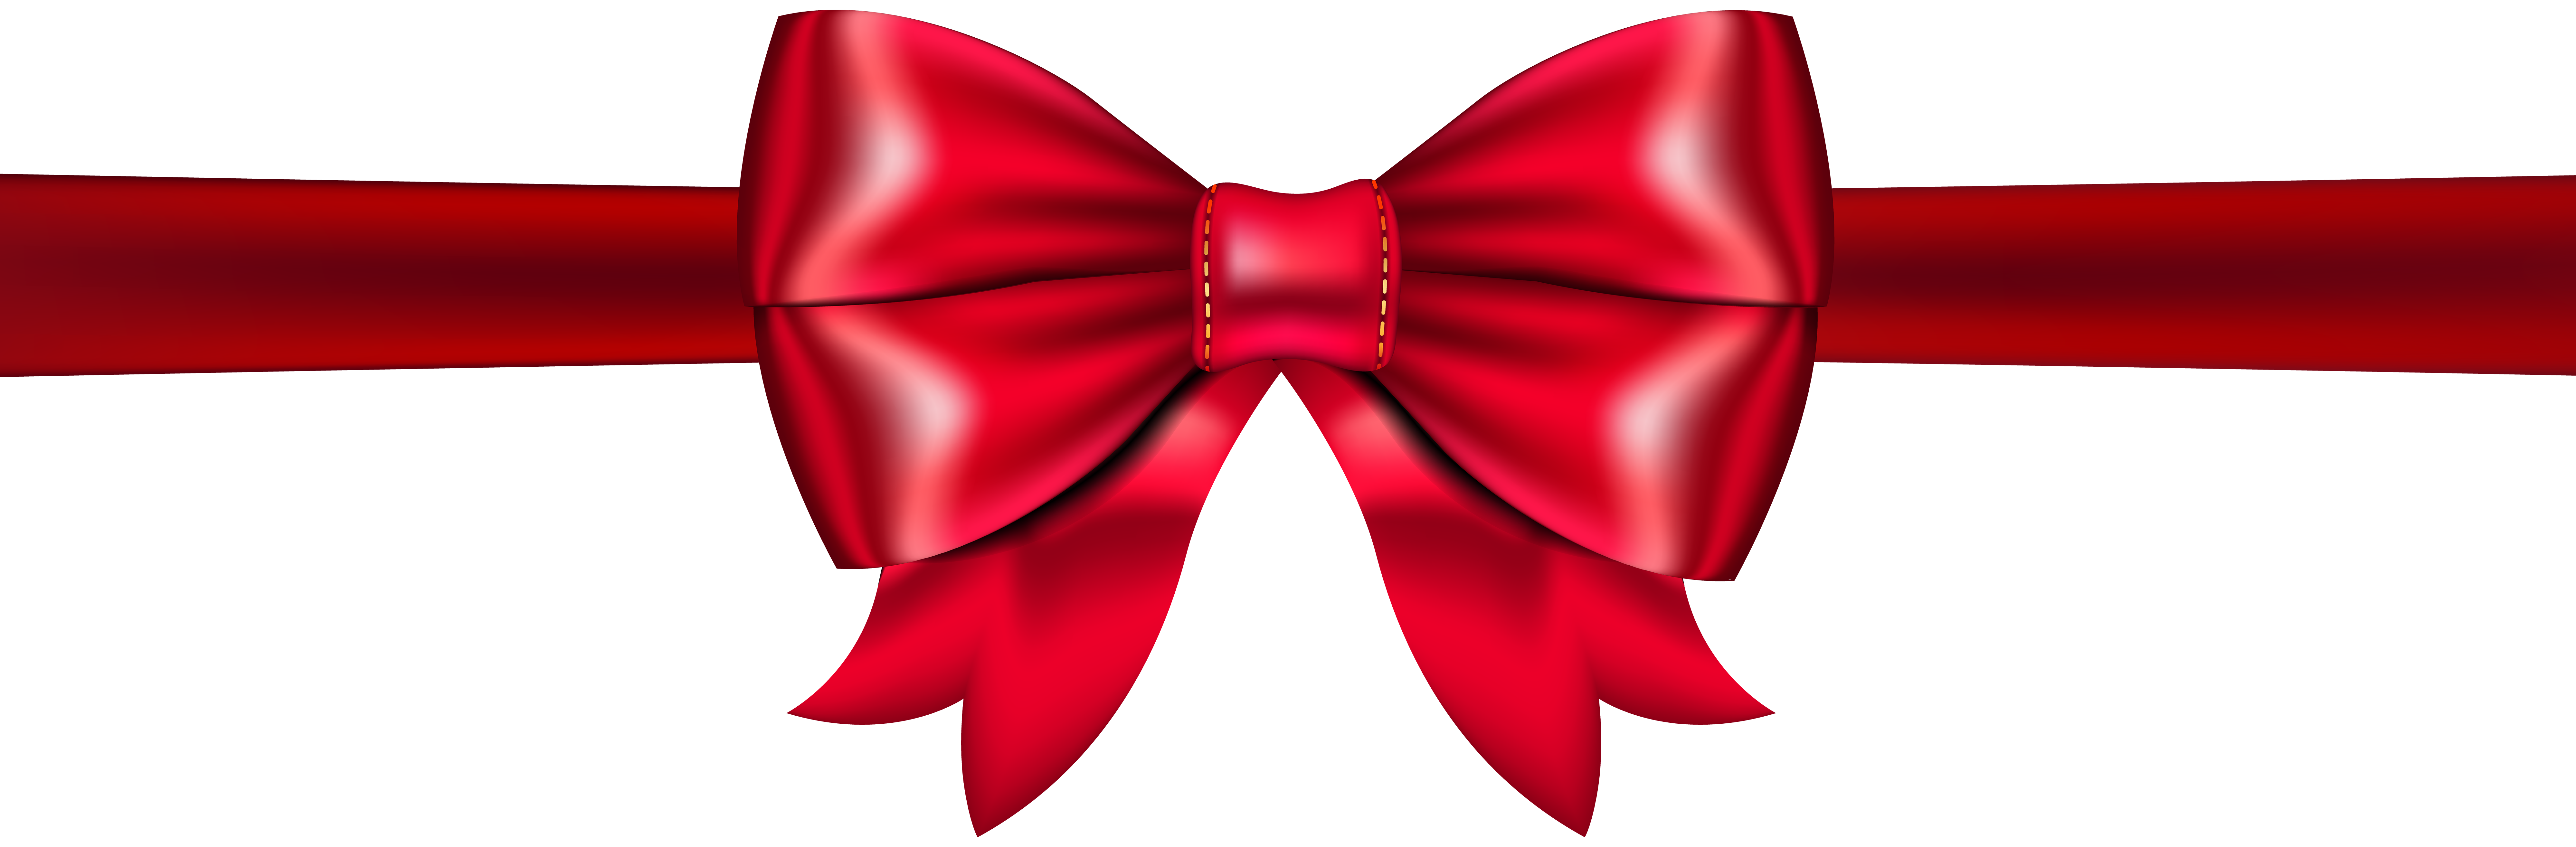 Beautiful Red Bow PNG Clipart - Best WEB Clipart